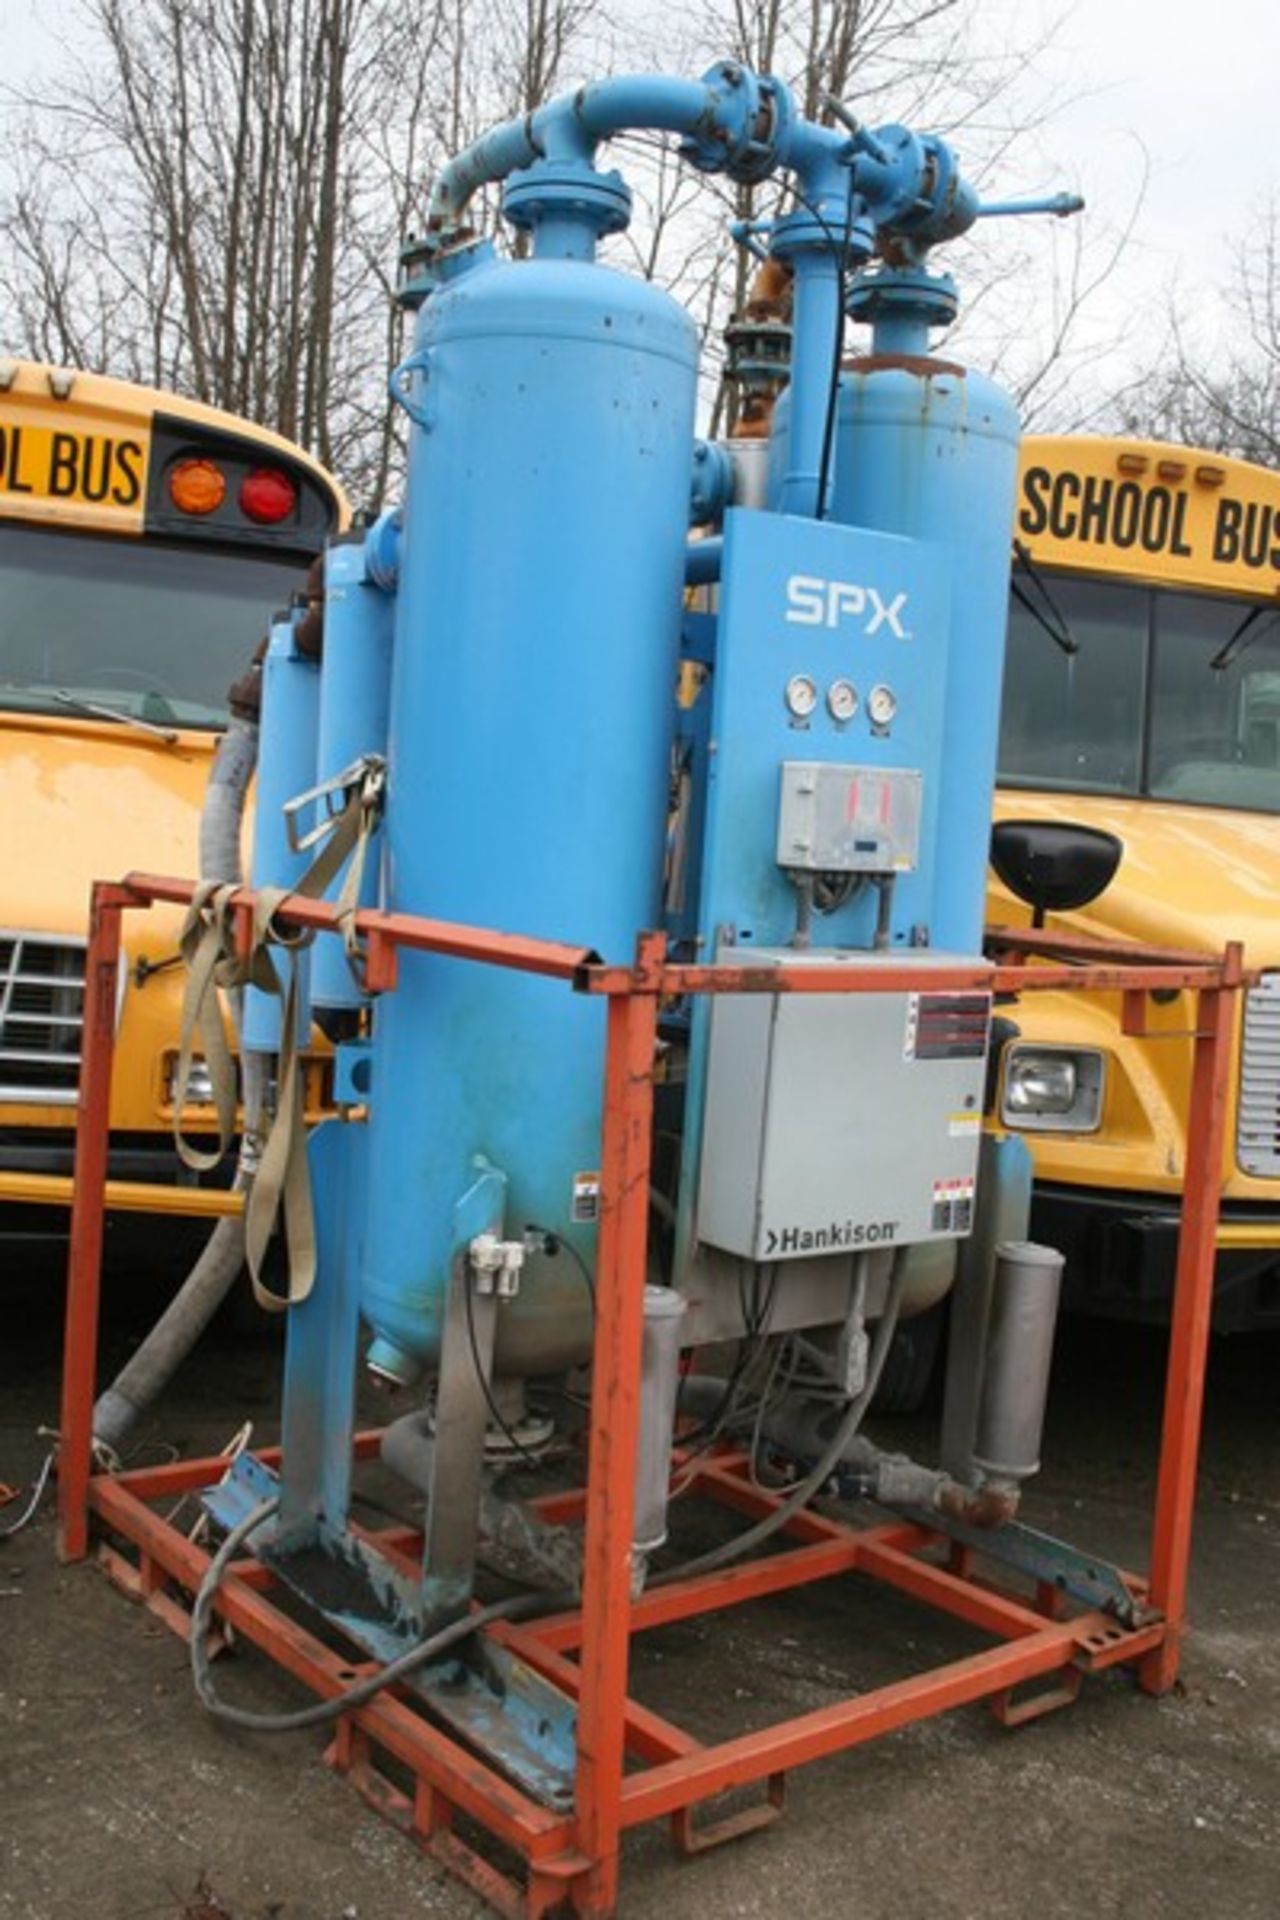 SPX Desiccant Dryer with Orange Skid Included (Loading/Handling Fee $250) (Located Apollo, PA) - Image 3 of 4